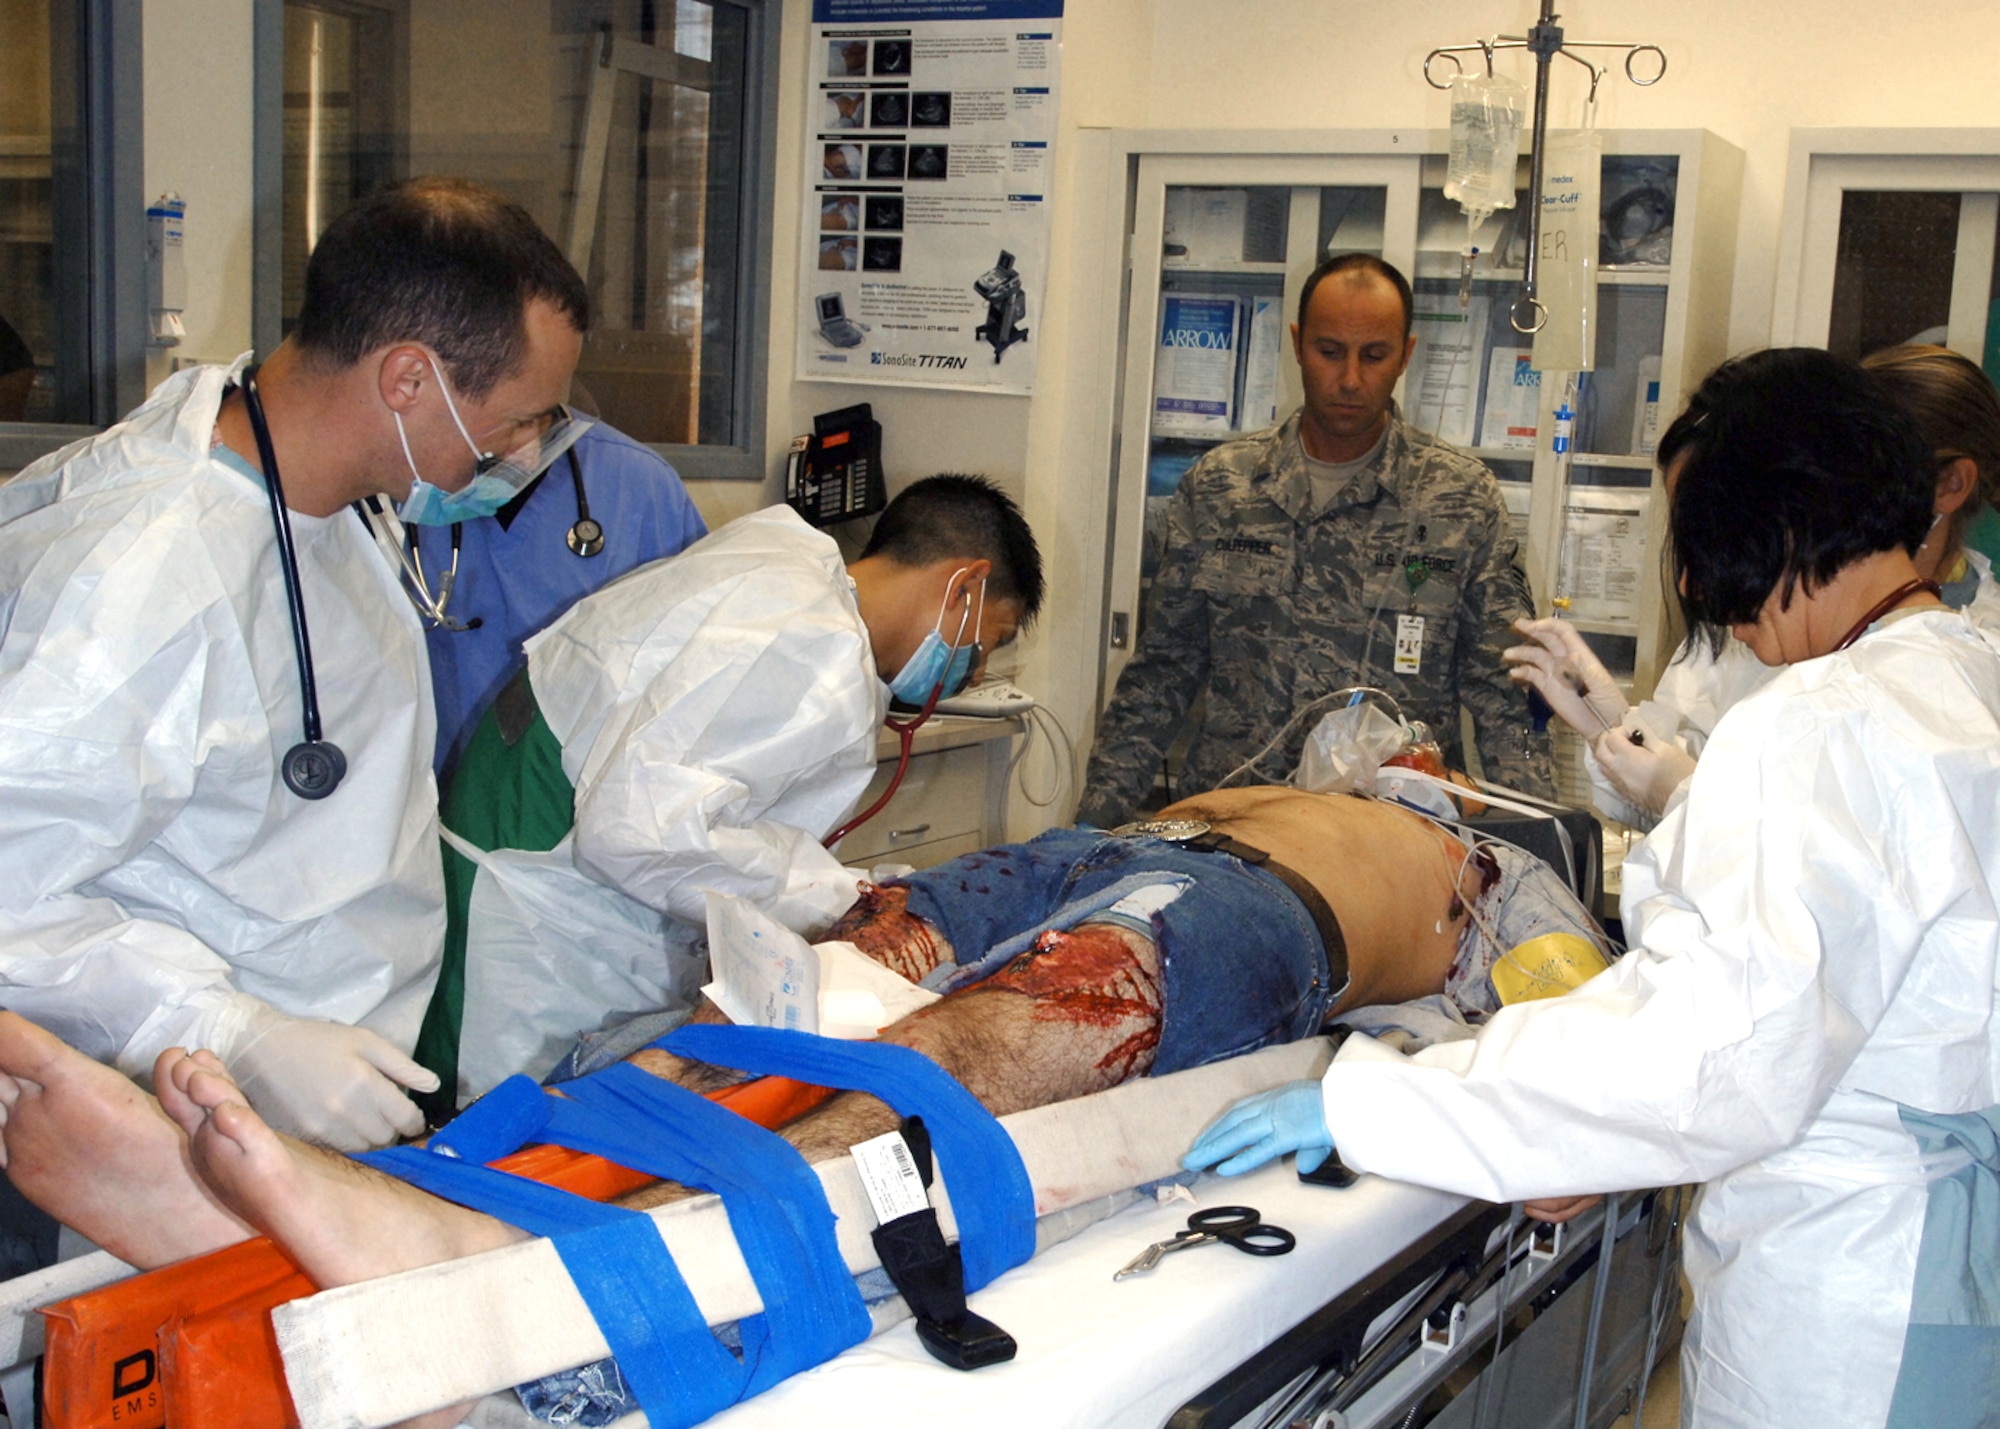 A 59th Medical Wing Trauma Team performs emergency resuscitation procedures during a mock exercise.  As of Jul 1, Wilford Hall Medical Center will no longer care for trauma patients. The hospital's trauma staff will move its Air Force trauma mission to Ft. Sam to create the San Antonio Military Medical Center by September, 2011, in compliance with the 2005 BRAC law. The WHMC emergency department remains open for non-trauma care. (U.S. Air Force photo/Tech. Sgt. Thomas Coney)

